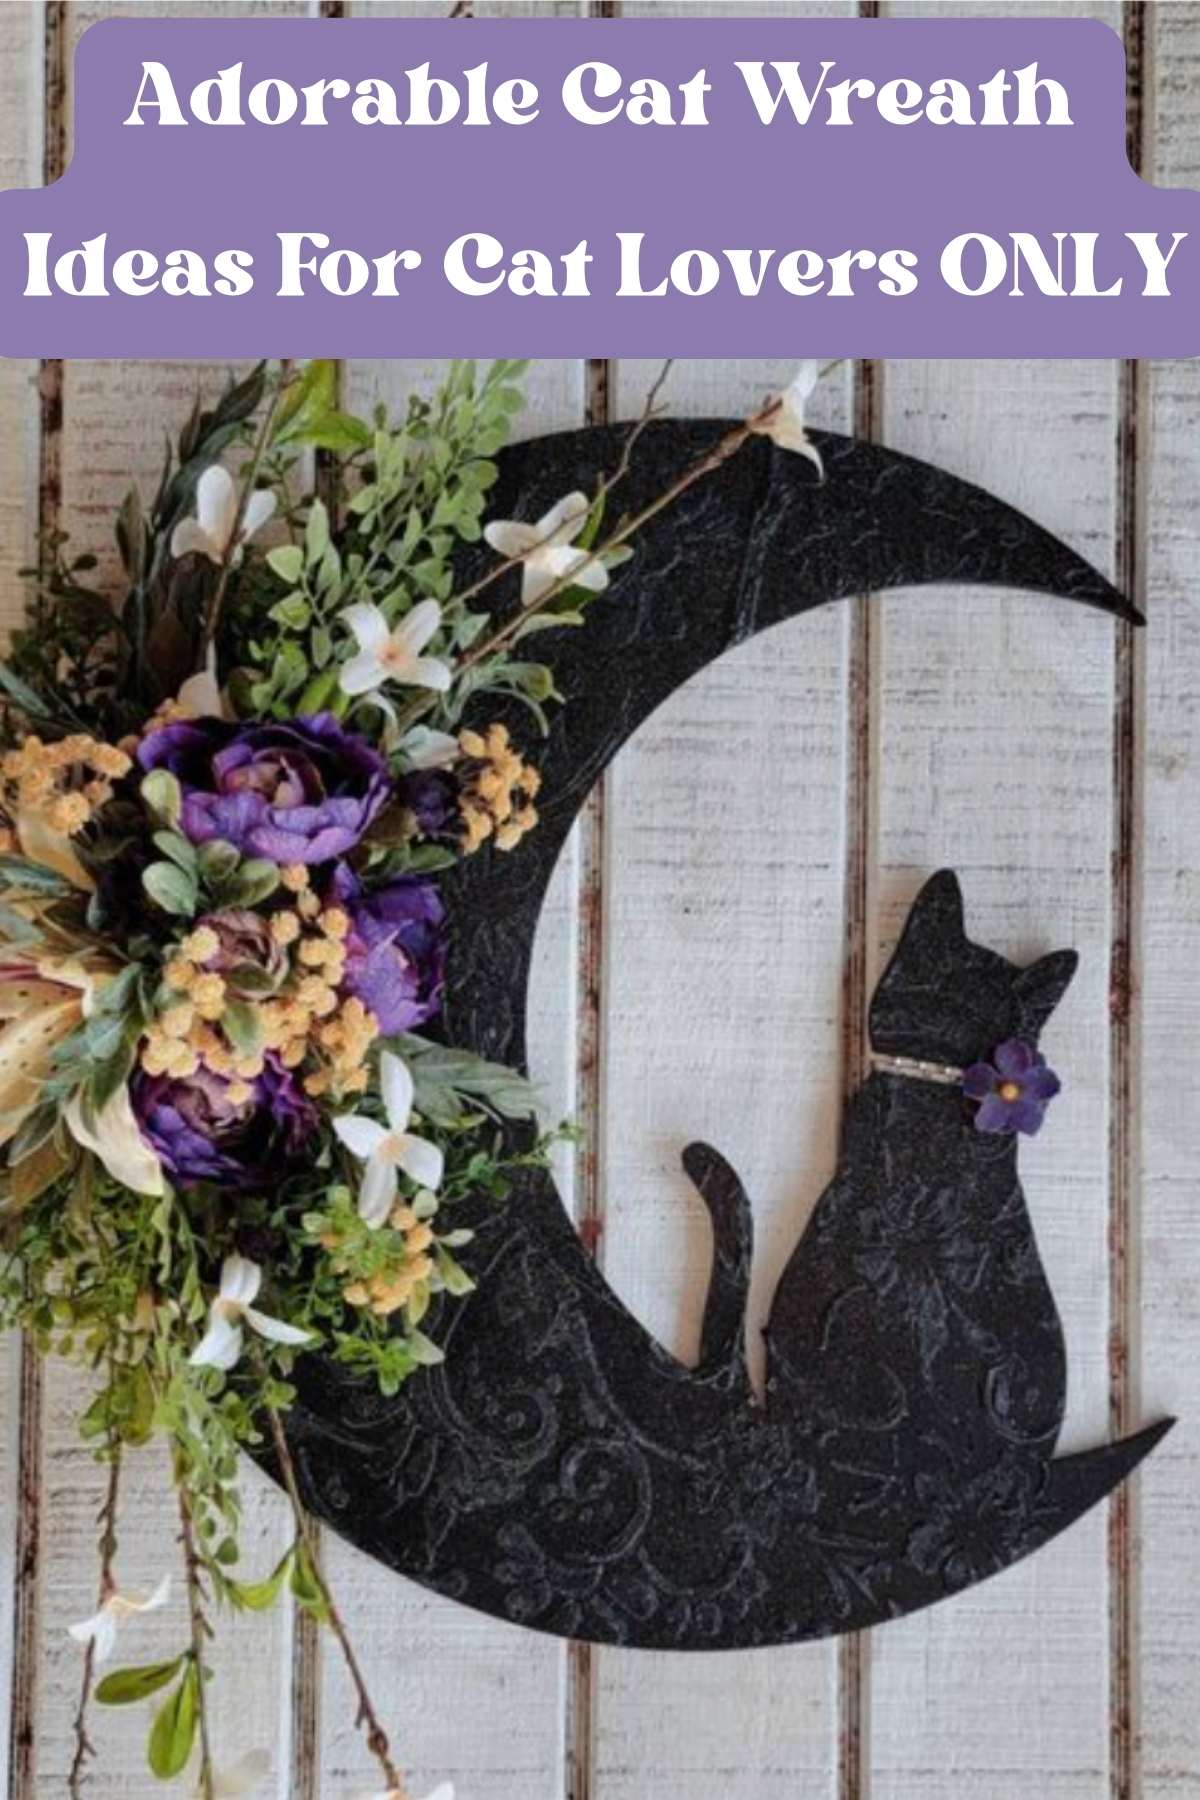 Adorable Cat Wreath ideas for cat lovers only. Cute photo of cat sitting on moon.